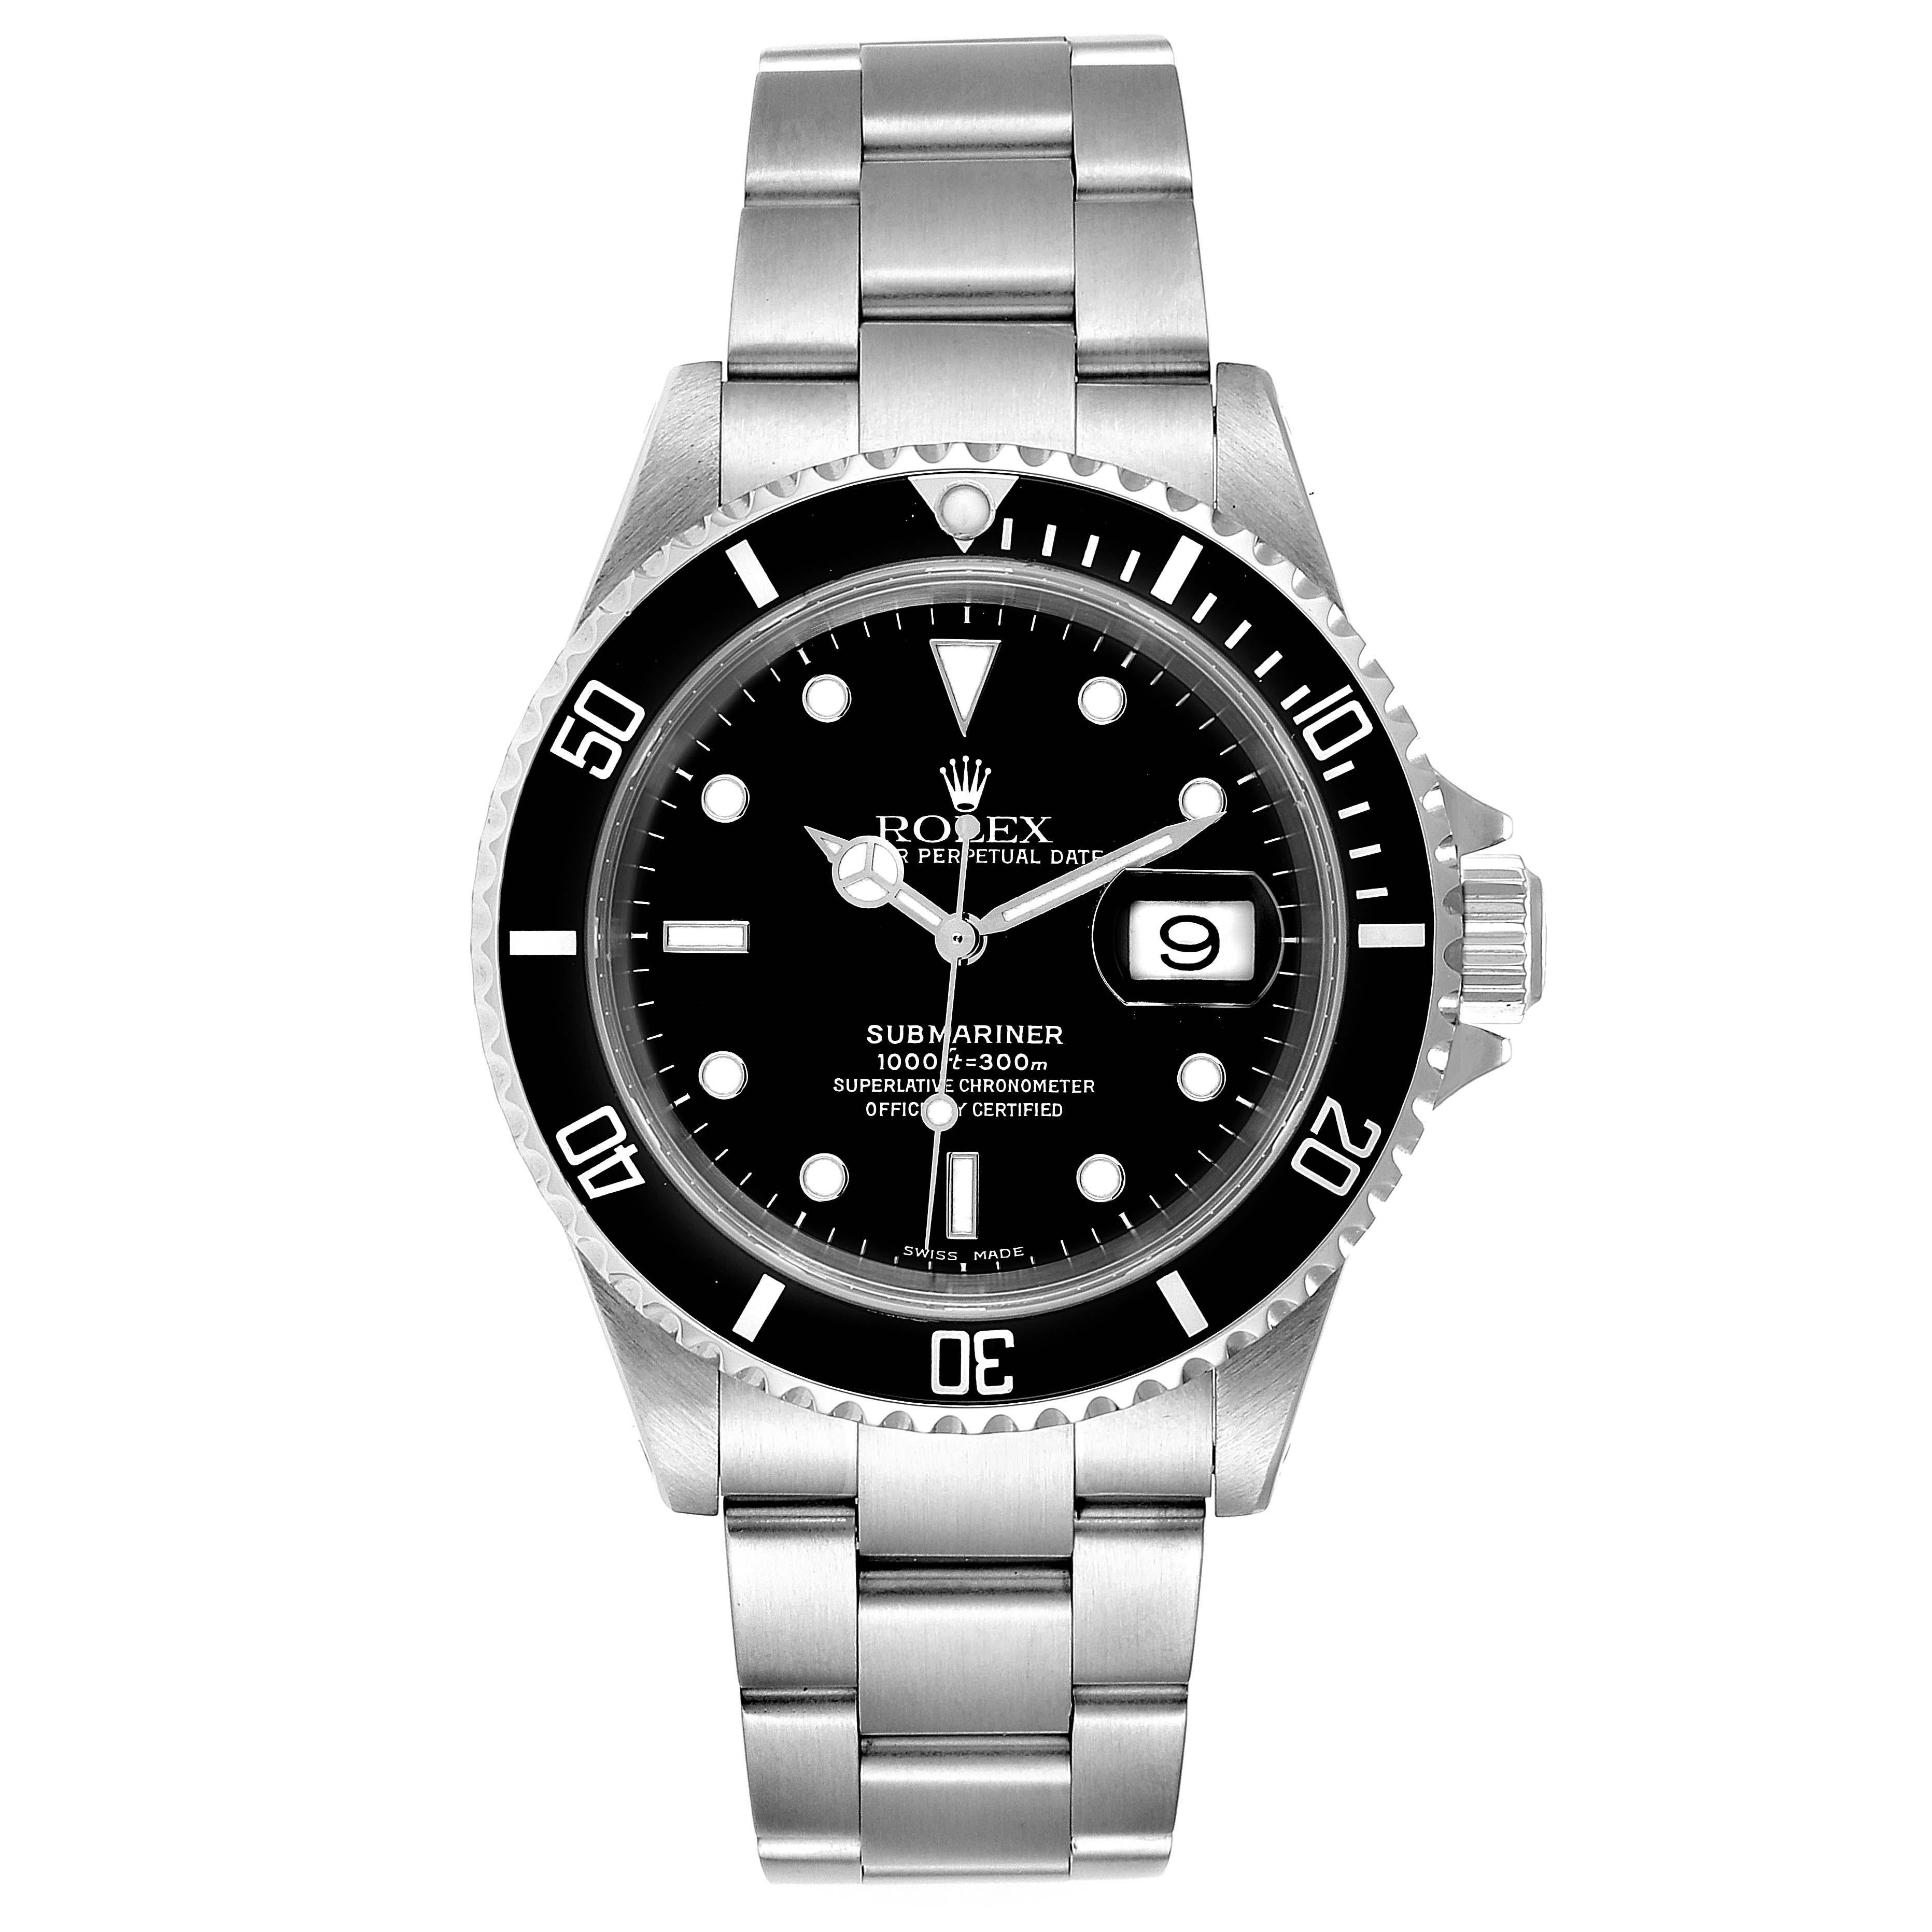 Rolex Submariner Date 40mm Stainless Steel Mens Watch 16610 Box Papers. Officially certified chronometer self-winding movement. Stainless steel case 40.0 mm in diameter. Rolex logo on a crown. Special time-lapse unidirectional rotating bezel.